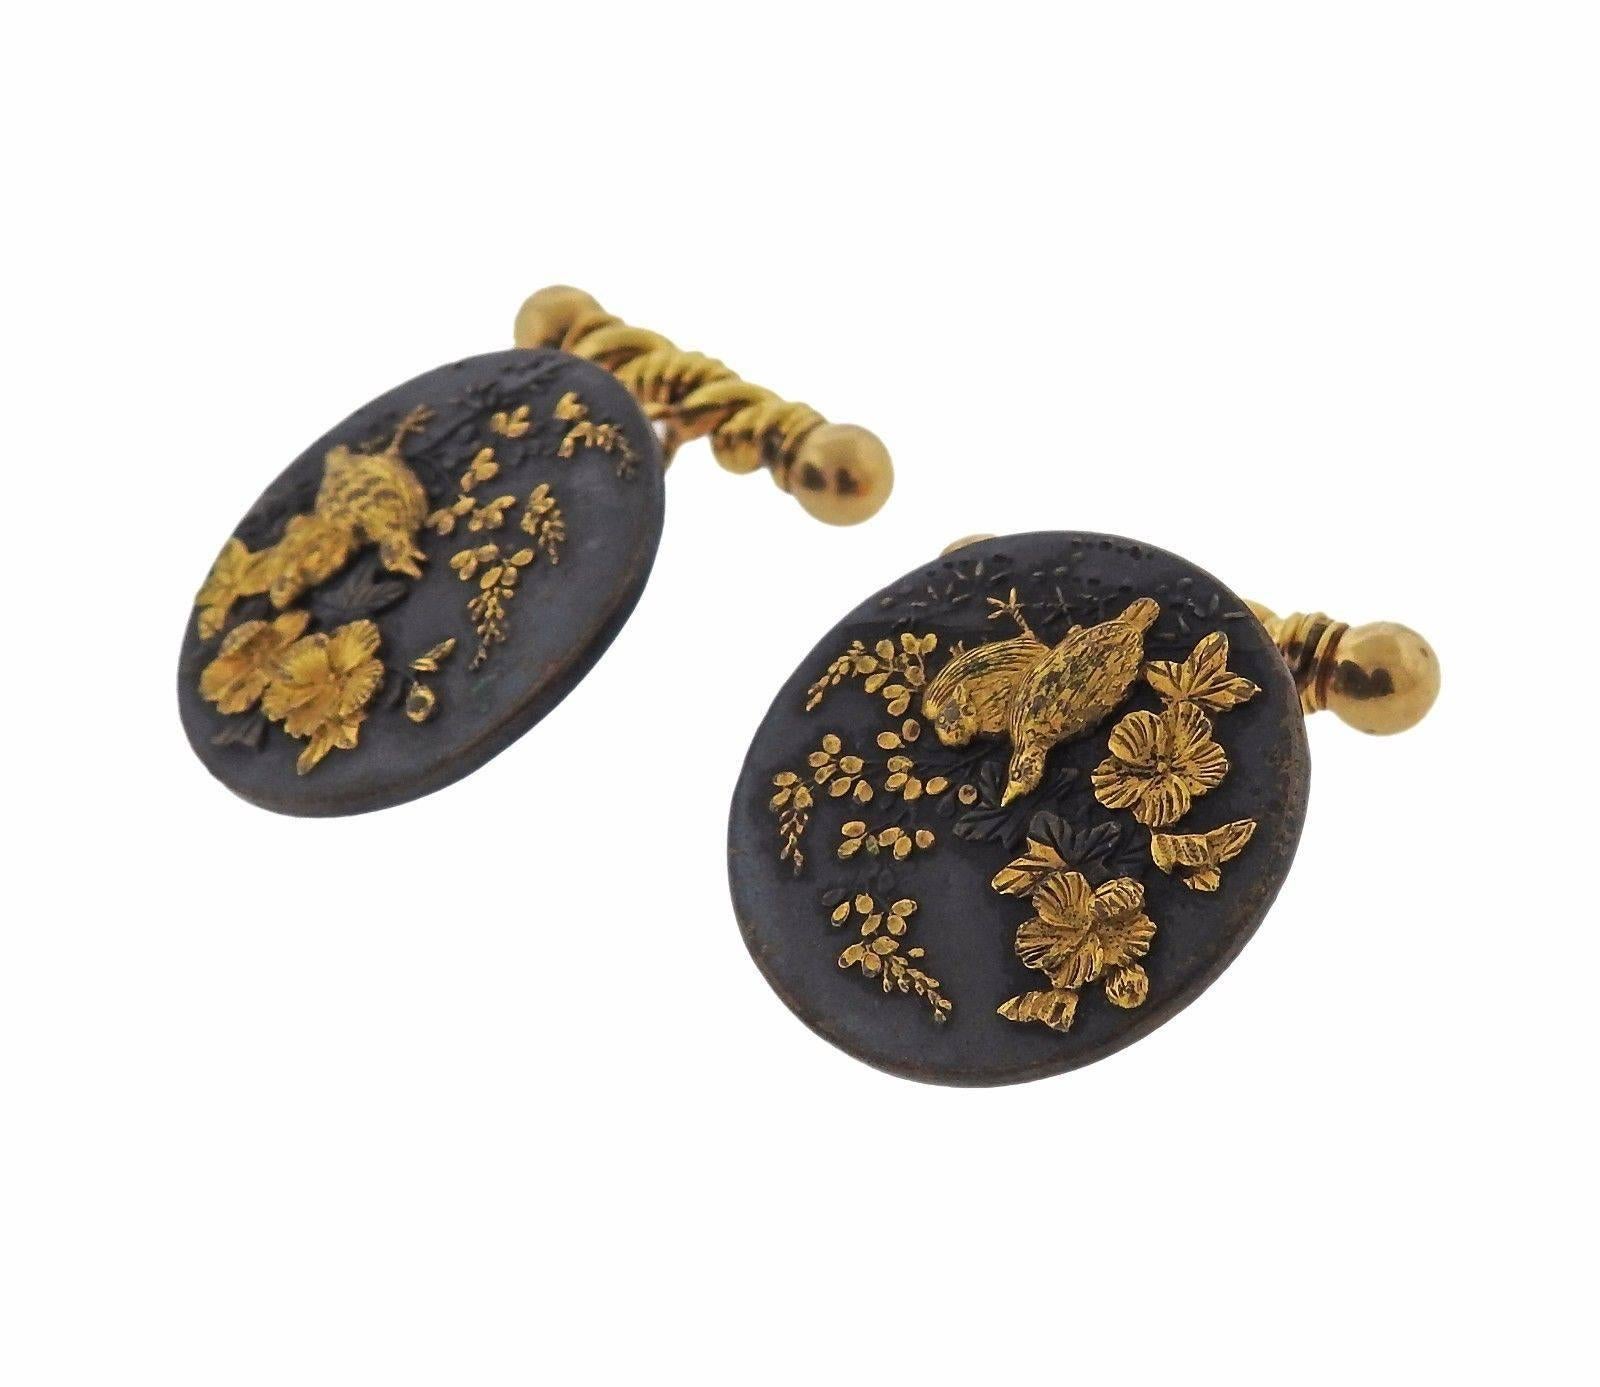 A pair of 14k yellow gold and shakudo metal cufflinks.  The cufflinks measure 27mm in diameter and weigh 30.7 grams.